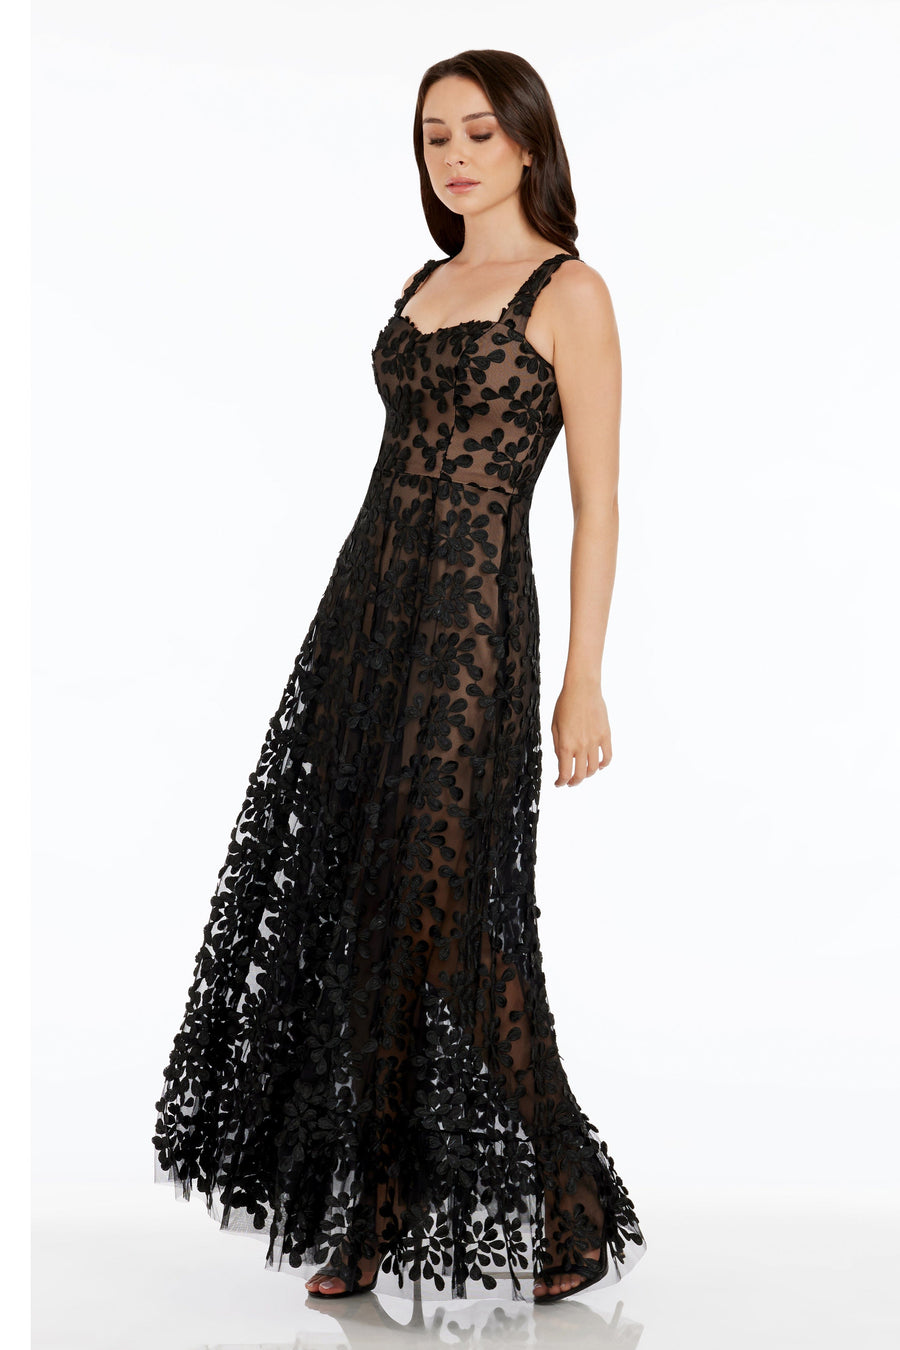 Women's Lace Formal Dresses & Evening Gowns | Nordstrom